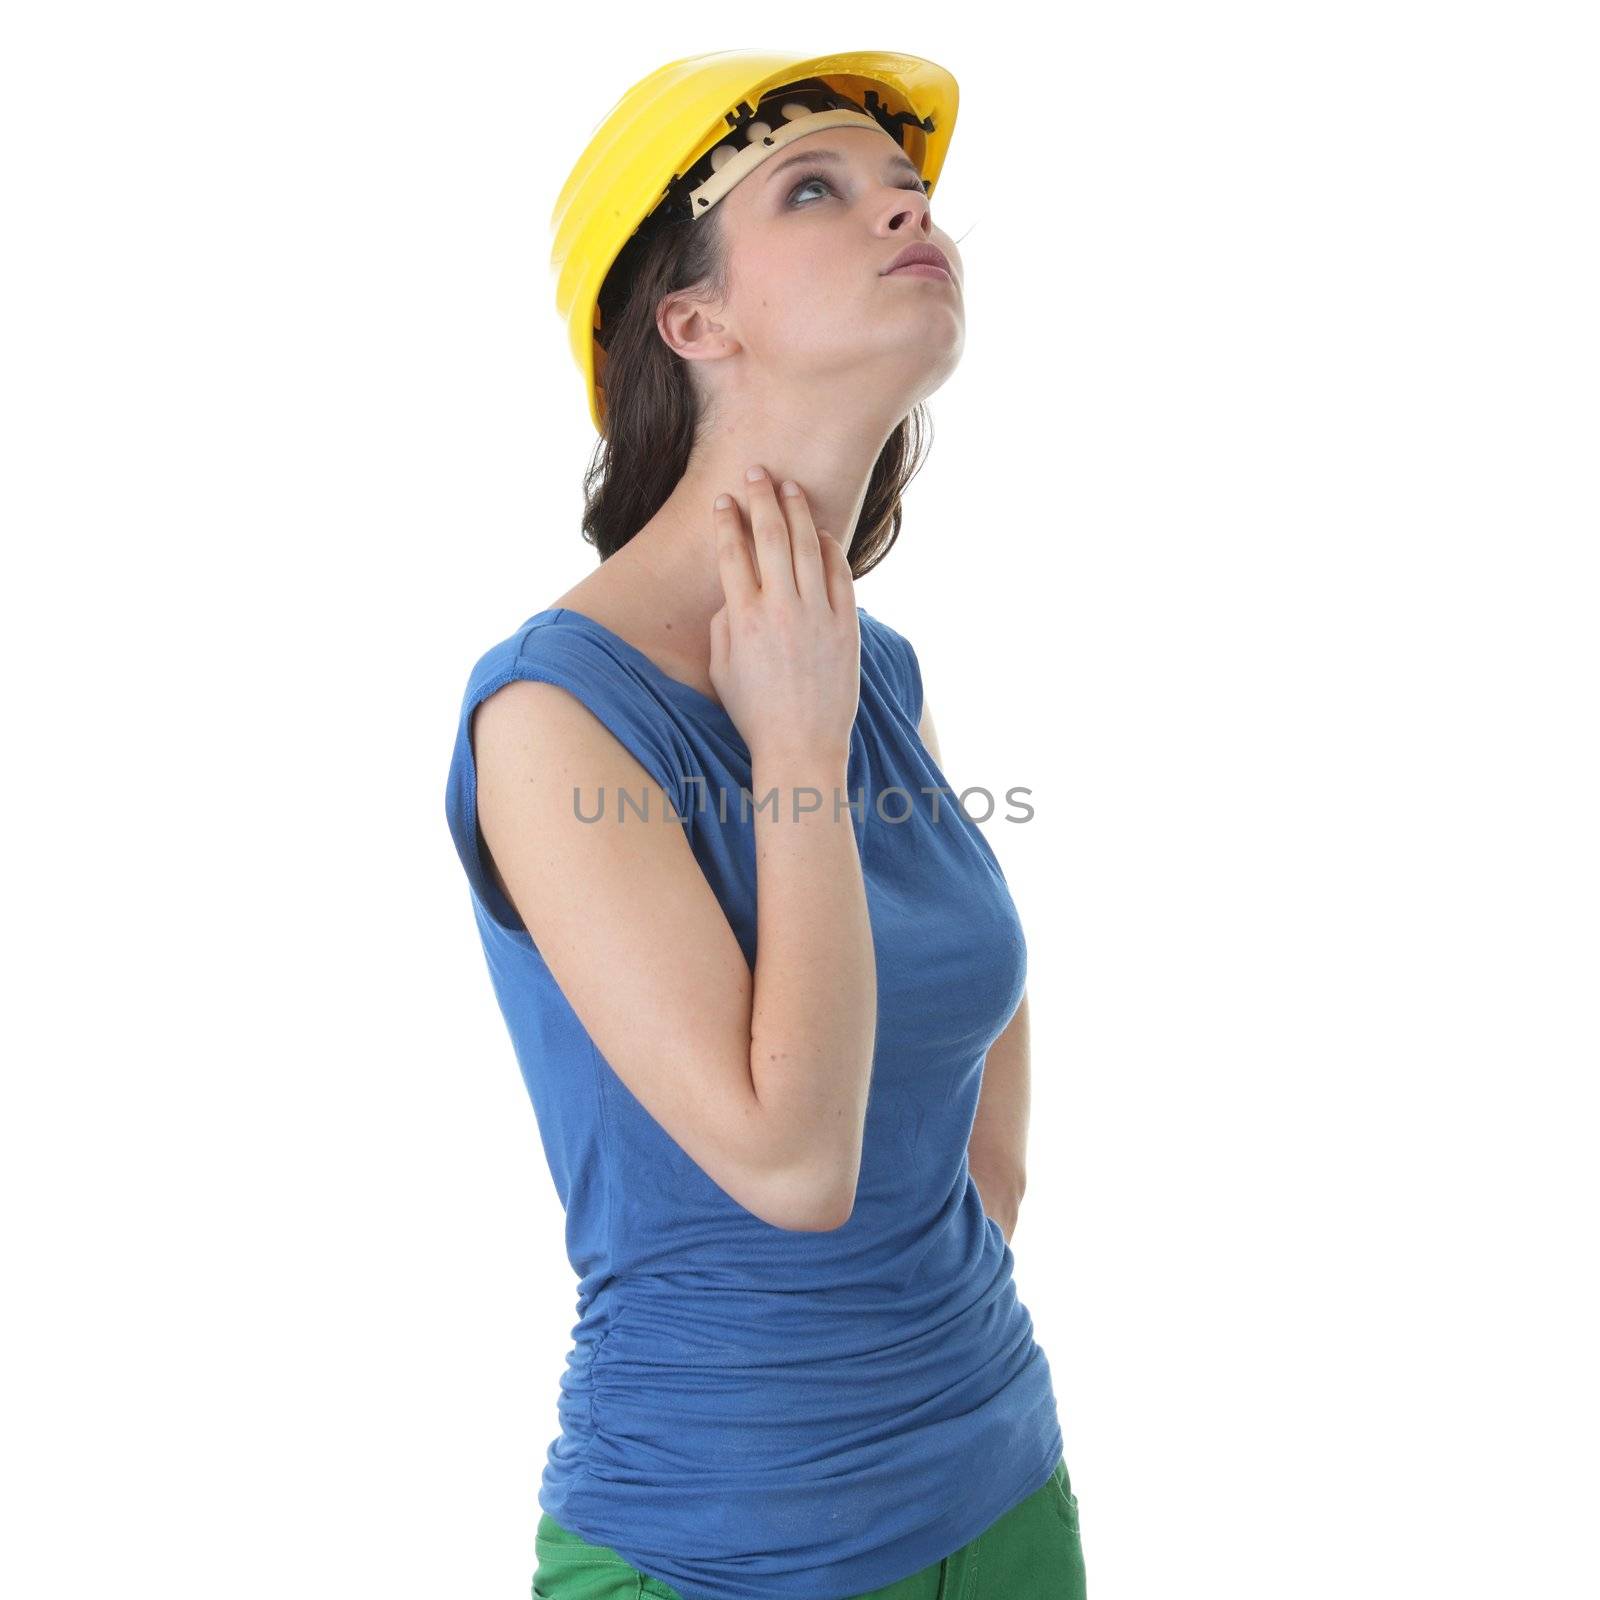 Sexy young woman construction worker contractor by BDS